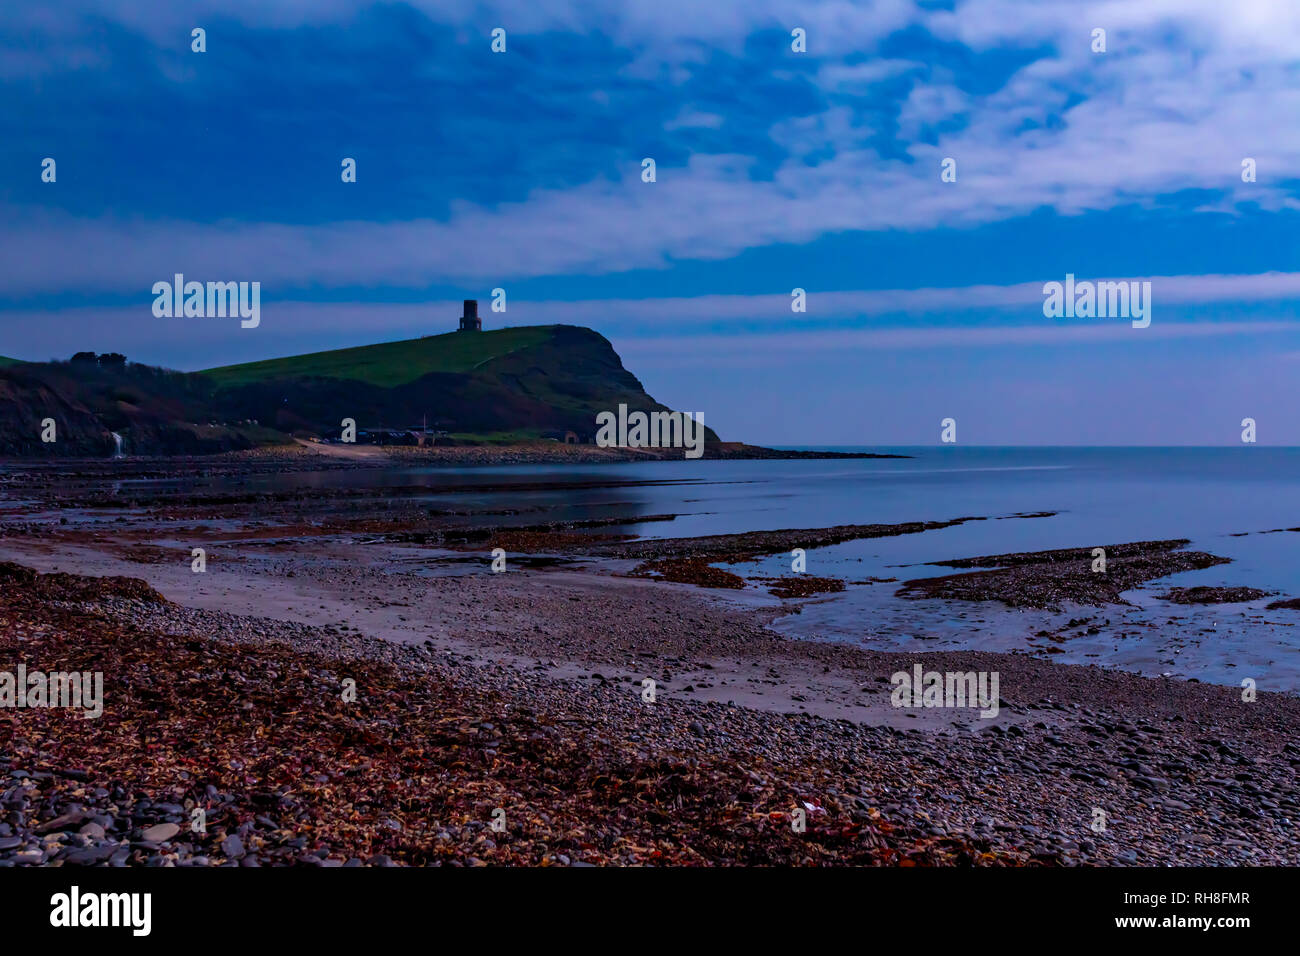 Long exposure night time photograph taken on Kimmeridge bay beach with cliffs and Clavell tower in background. Dorset, England Stock Photo